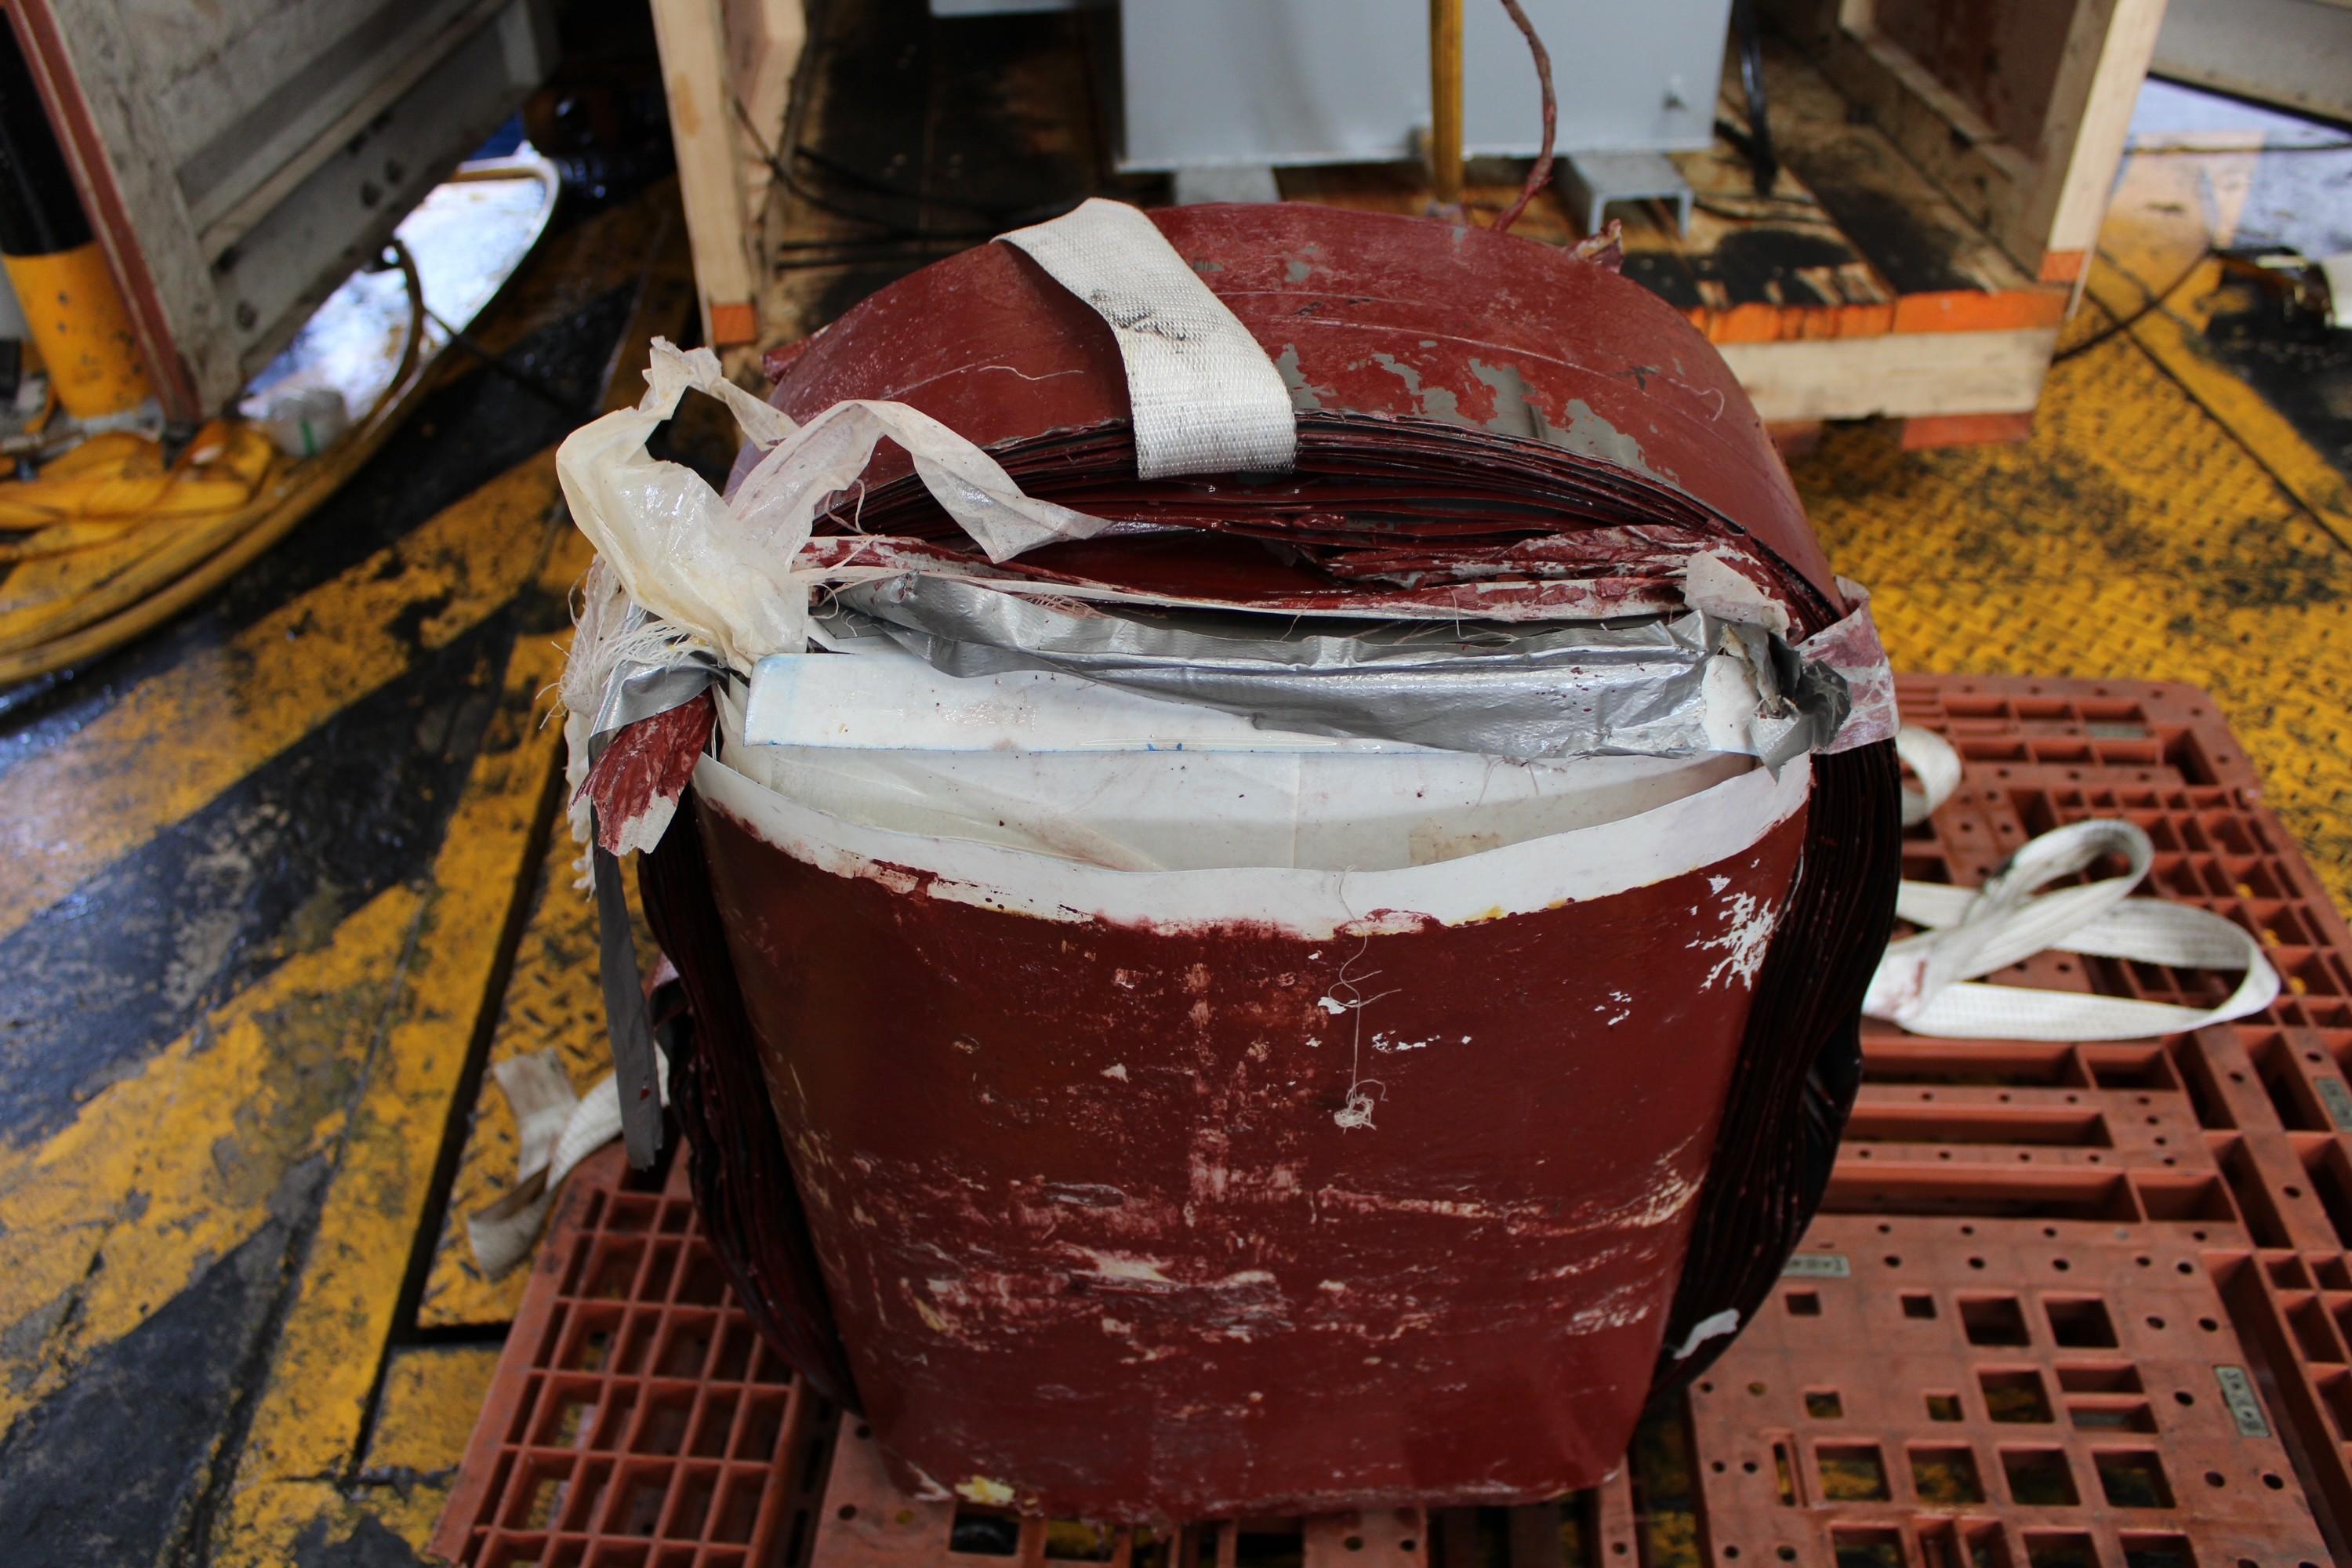 Hong Kong Customs detected a suspected drug trafficking case using large-scale electric transformer last month and seized about 120 kilograms of suspected cocaine with an estimated market value of about $110 million. Photo shows metal box concealed with suspected cocaine found inside the large-scale electric transformer.